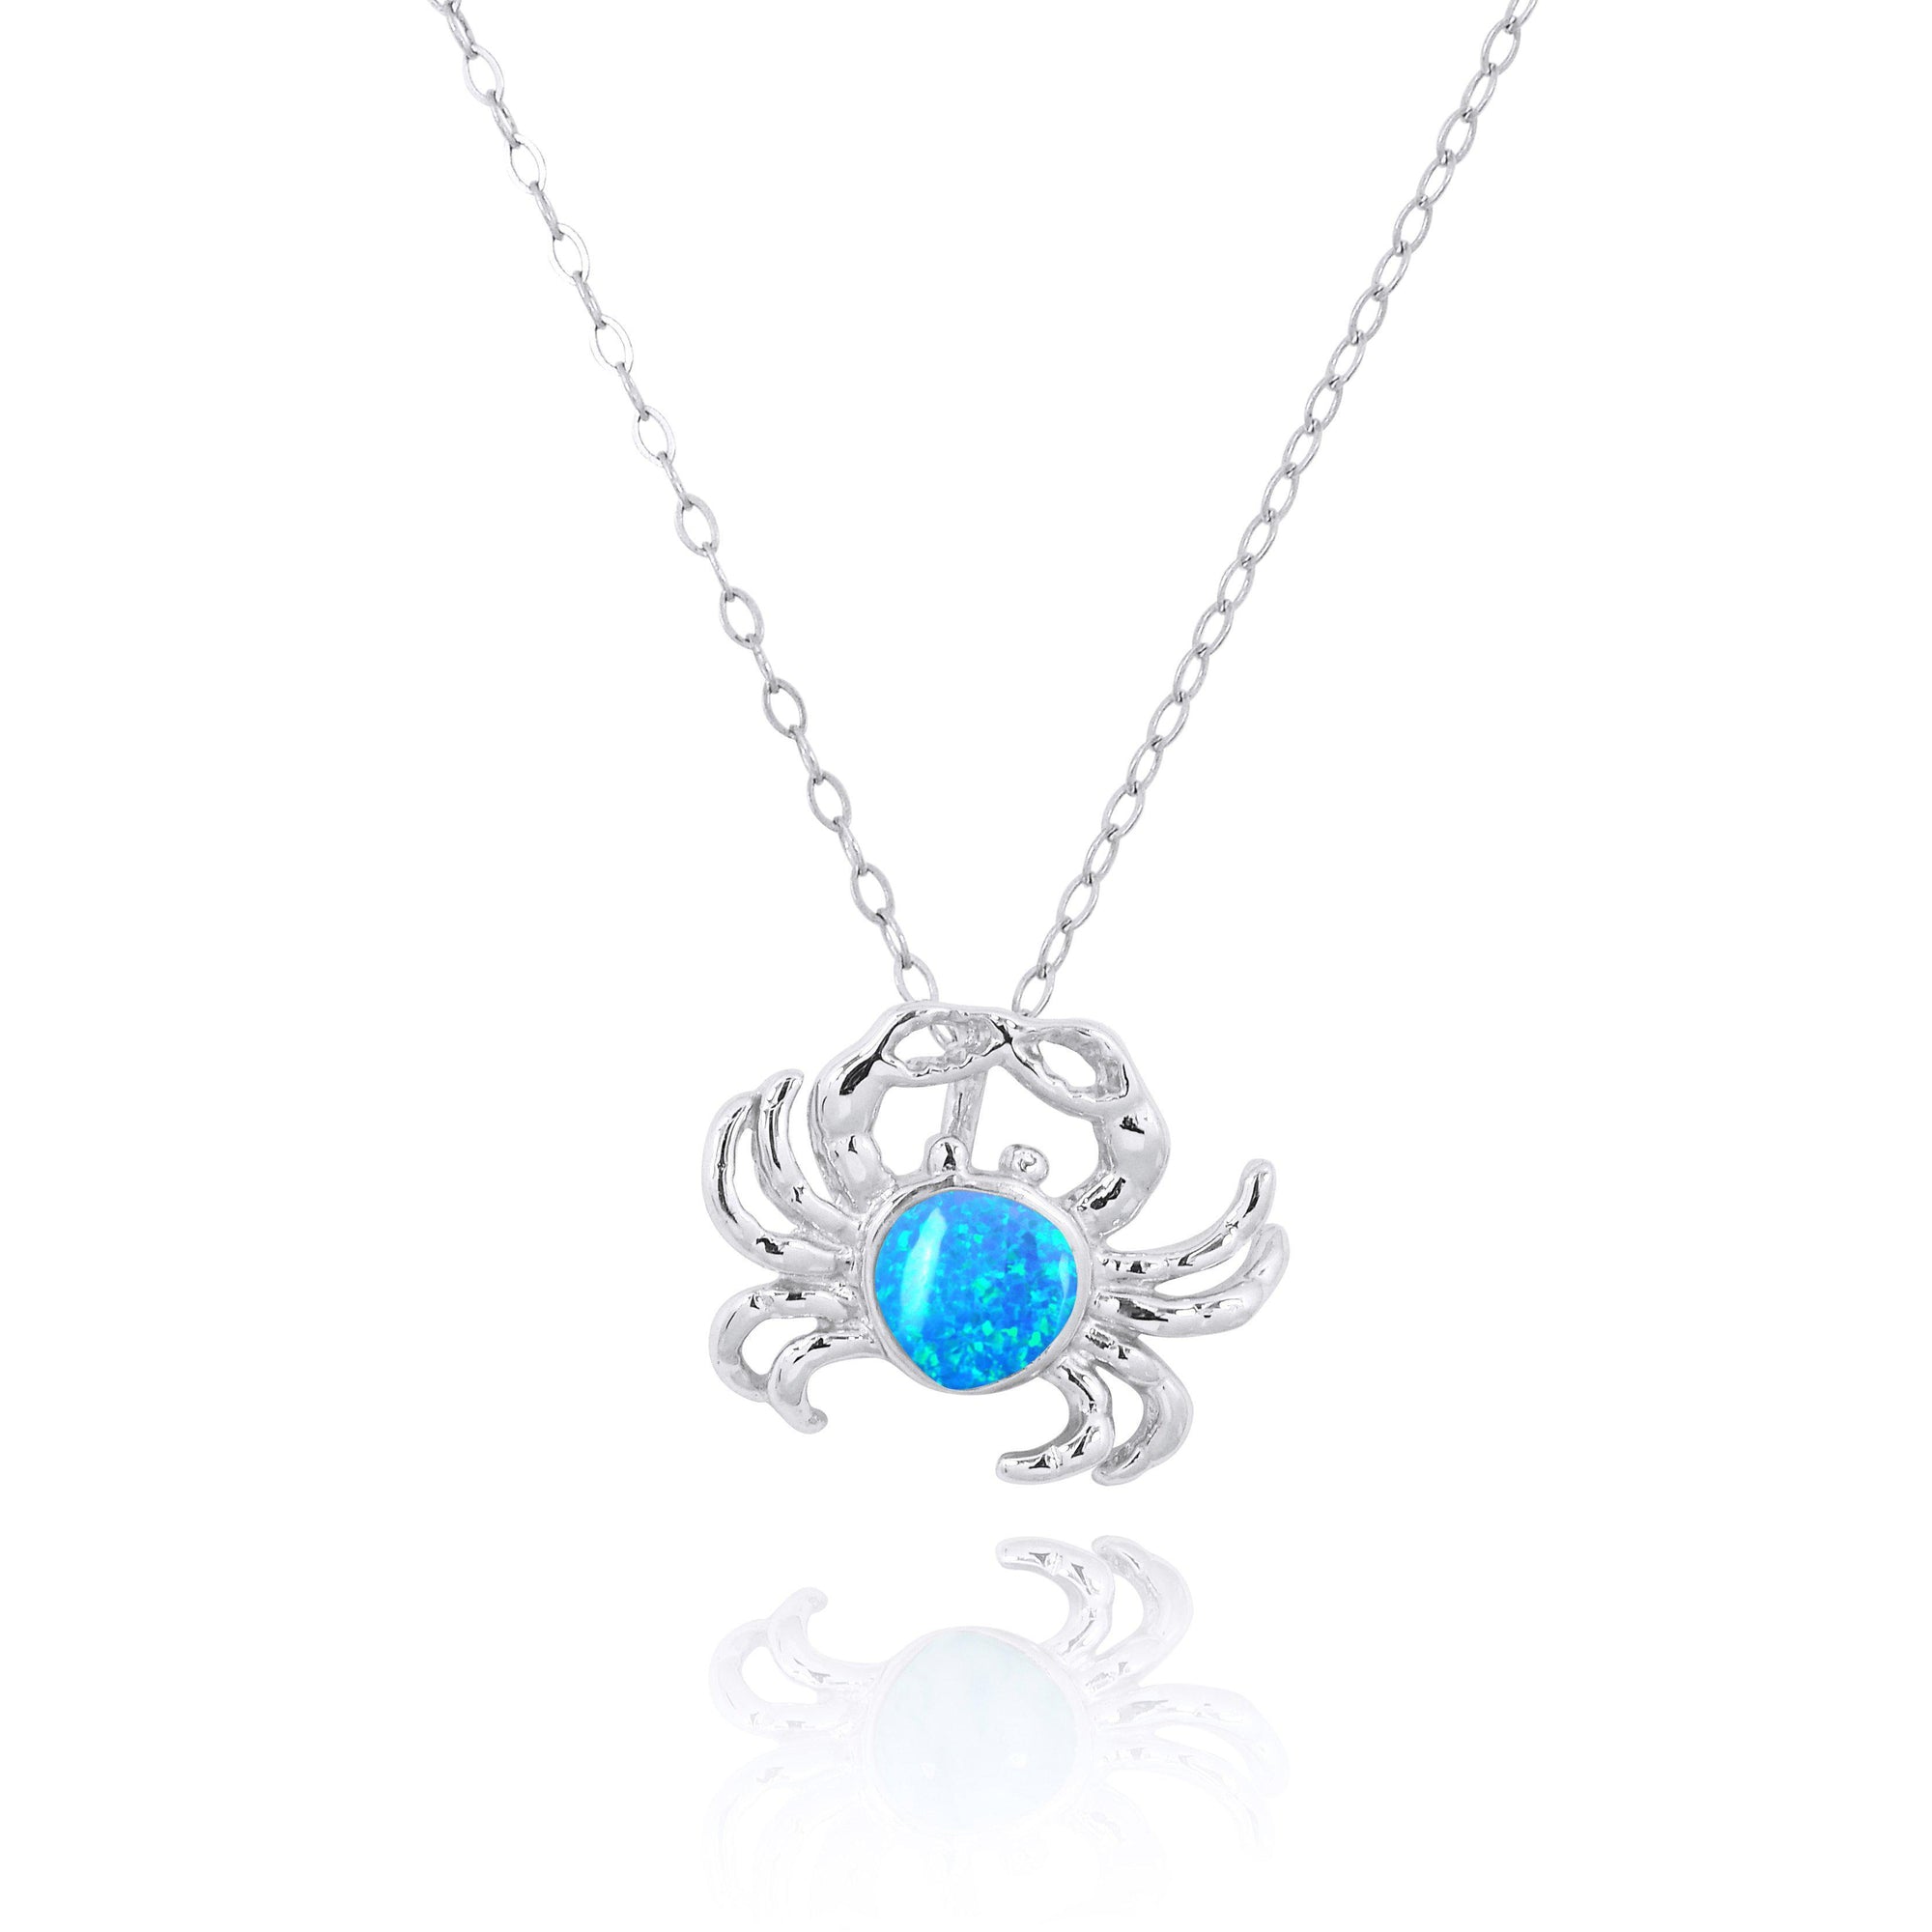 Sterling Silver Crab Pendant Necklace with Blue Opal